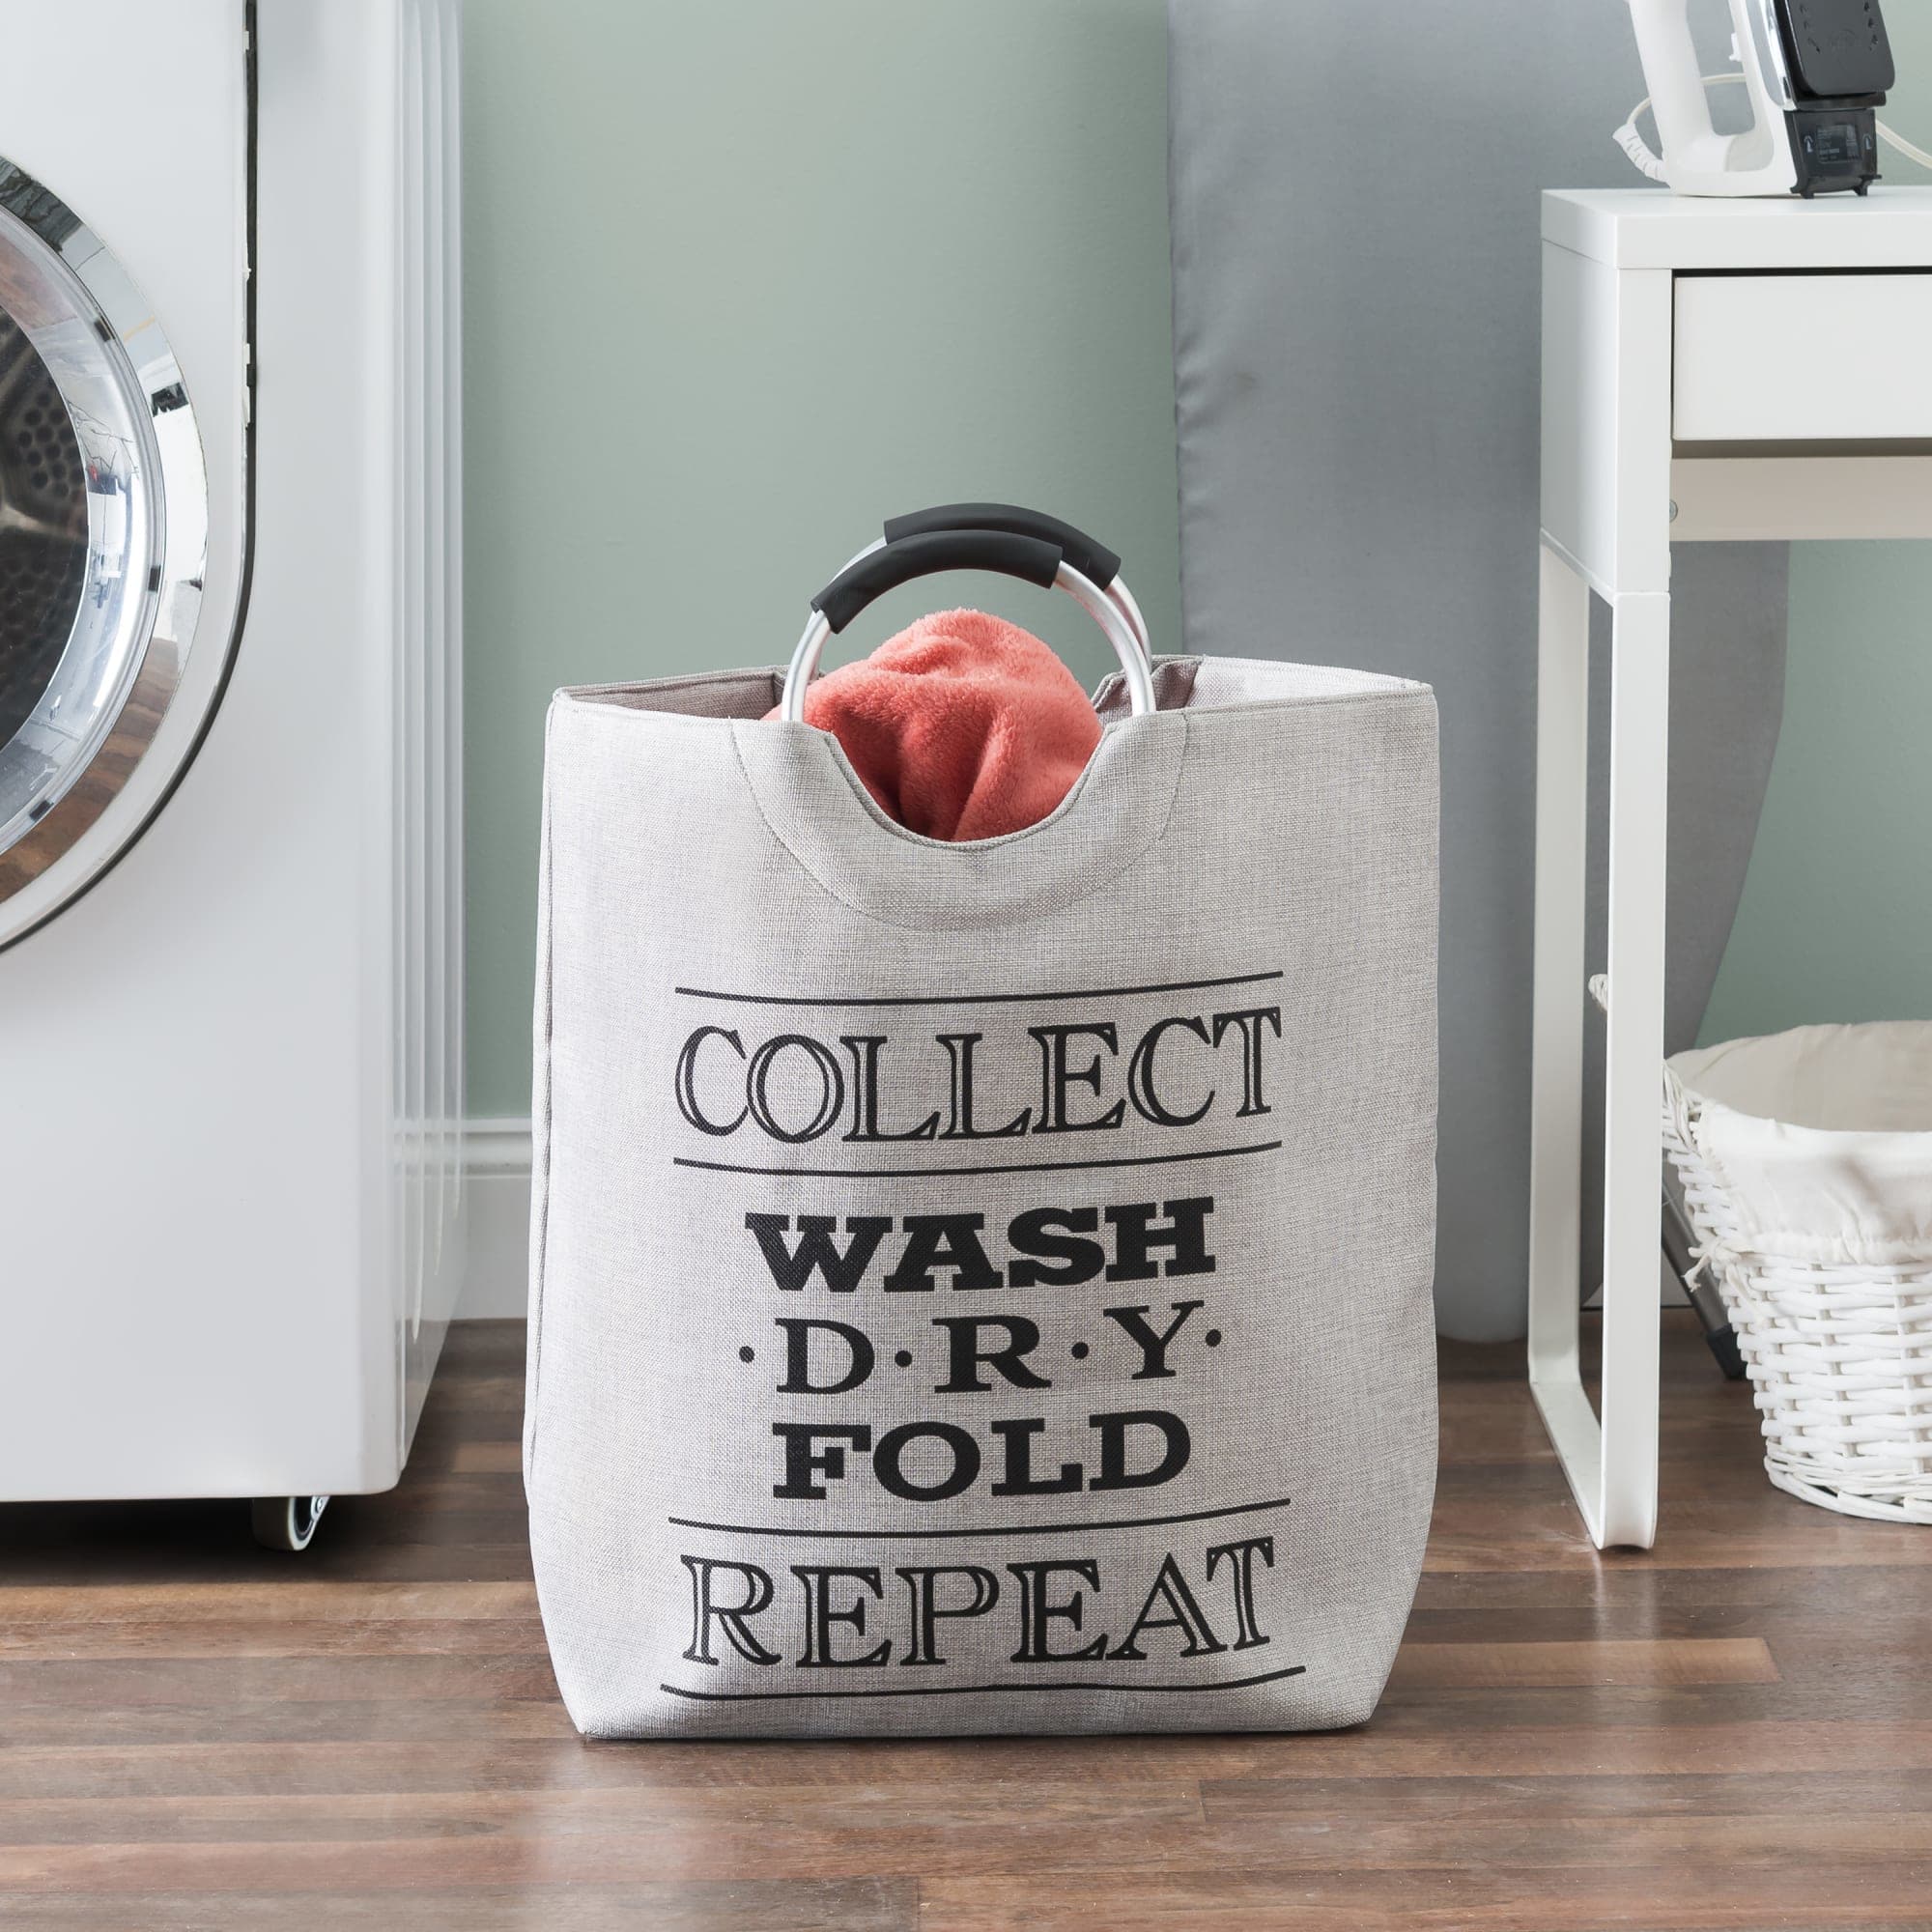 Home Basics Collect Laundry Canvas Hamper Tote with Soft Grip Handles, Grey $12.00 EACH, CASE PACK OF 6